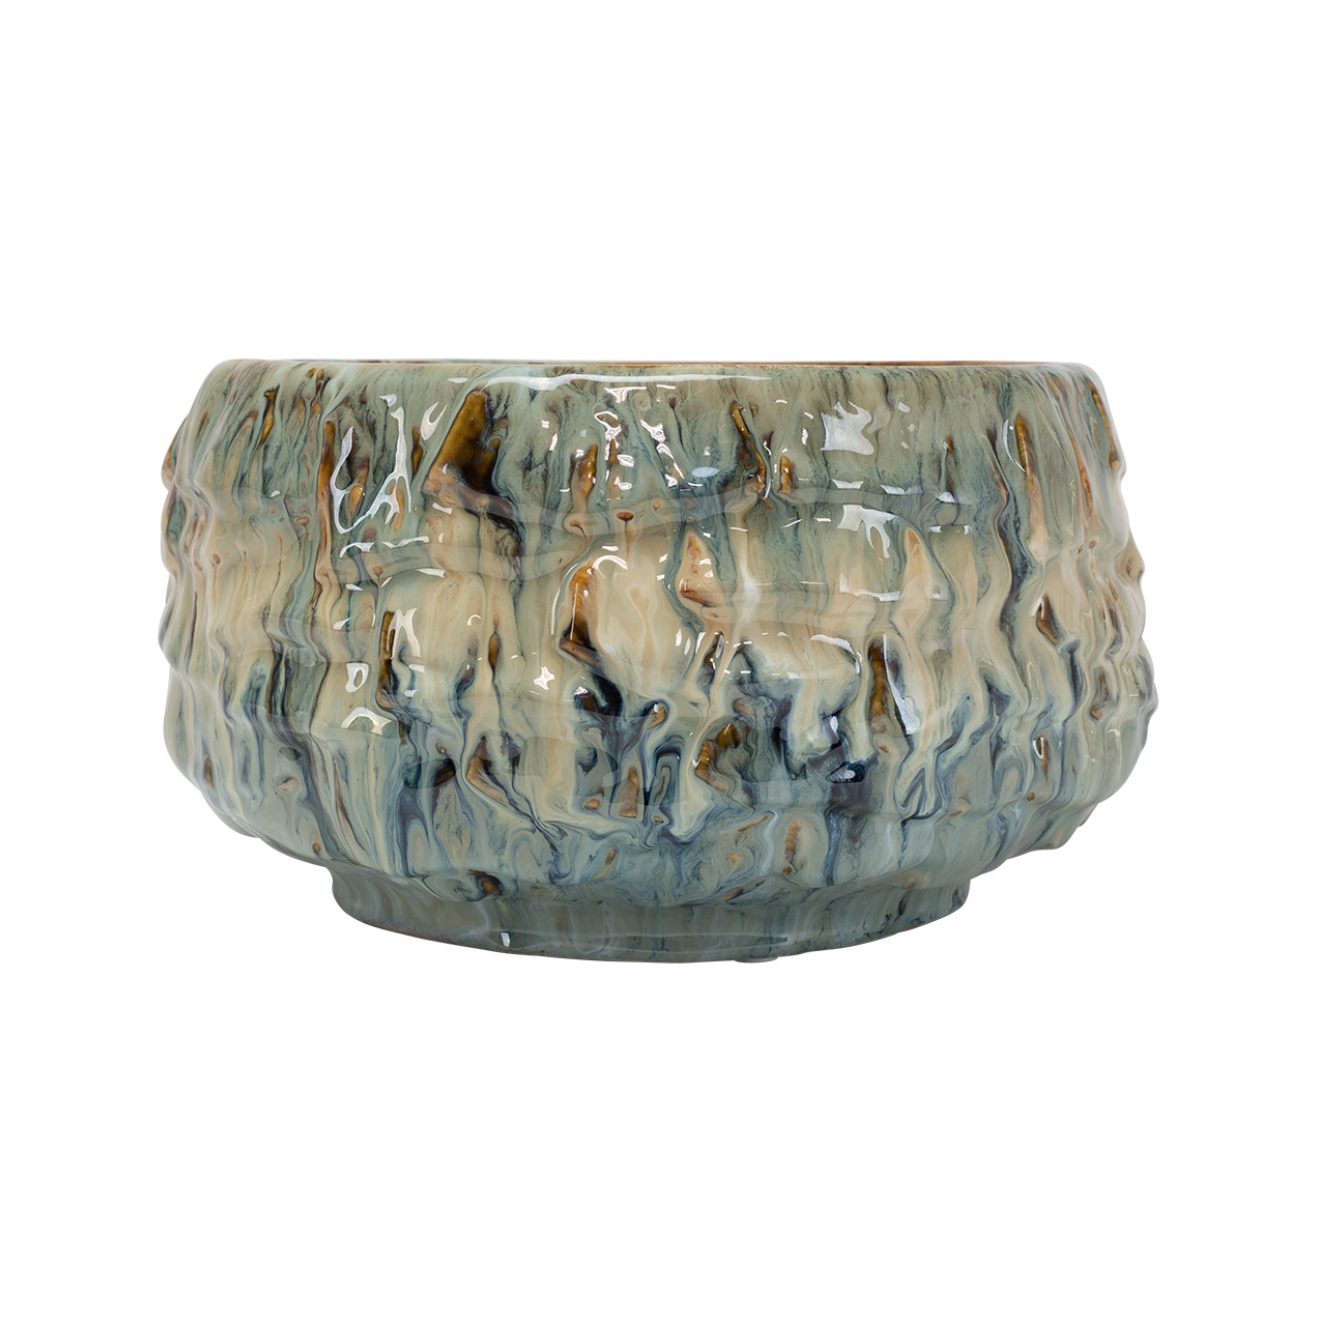 A Bremen Bowl from The Import Collection with a textured, glossy glaze in shades of blue, gray, and brown reminiscent of Scottsdale Arizona's desert landscape. The bowl has a wavy, irregular rim and a rustic finish, isolated on a white background.